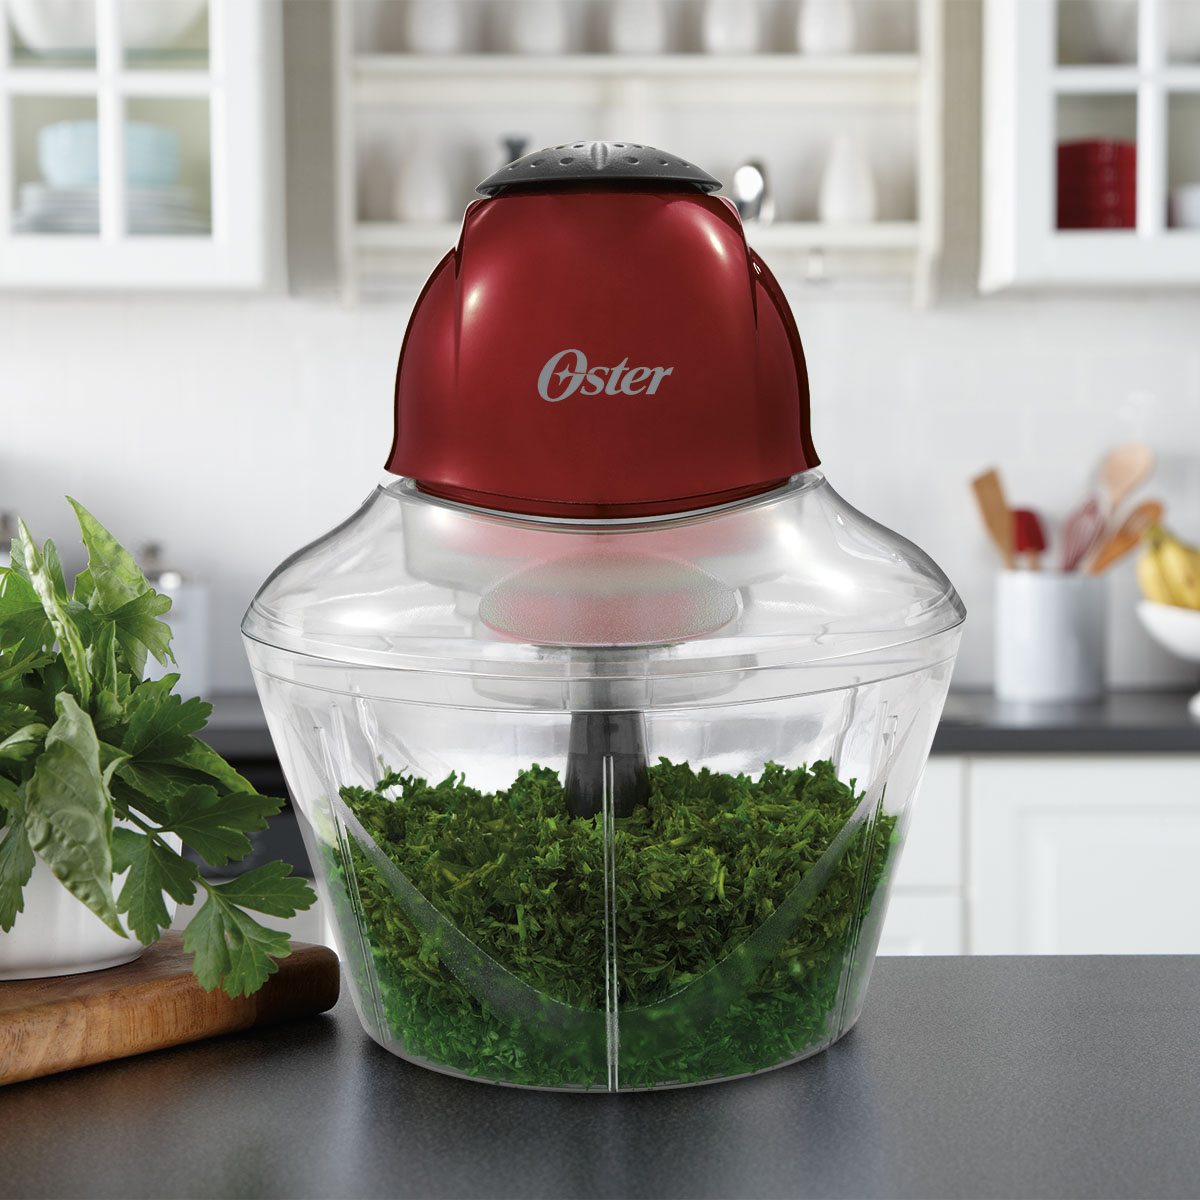 Oster Top Chop Food Chopper, 4-Cup Capacity (FPSTMC1250) - image 4 of 5